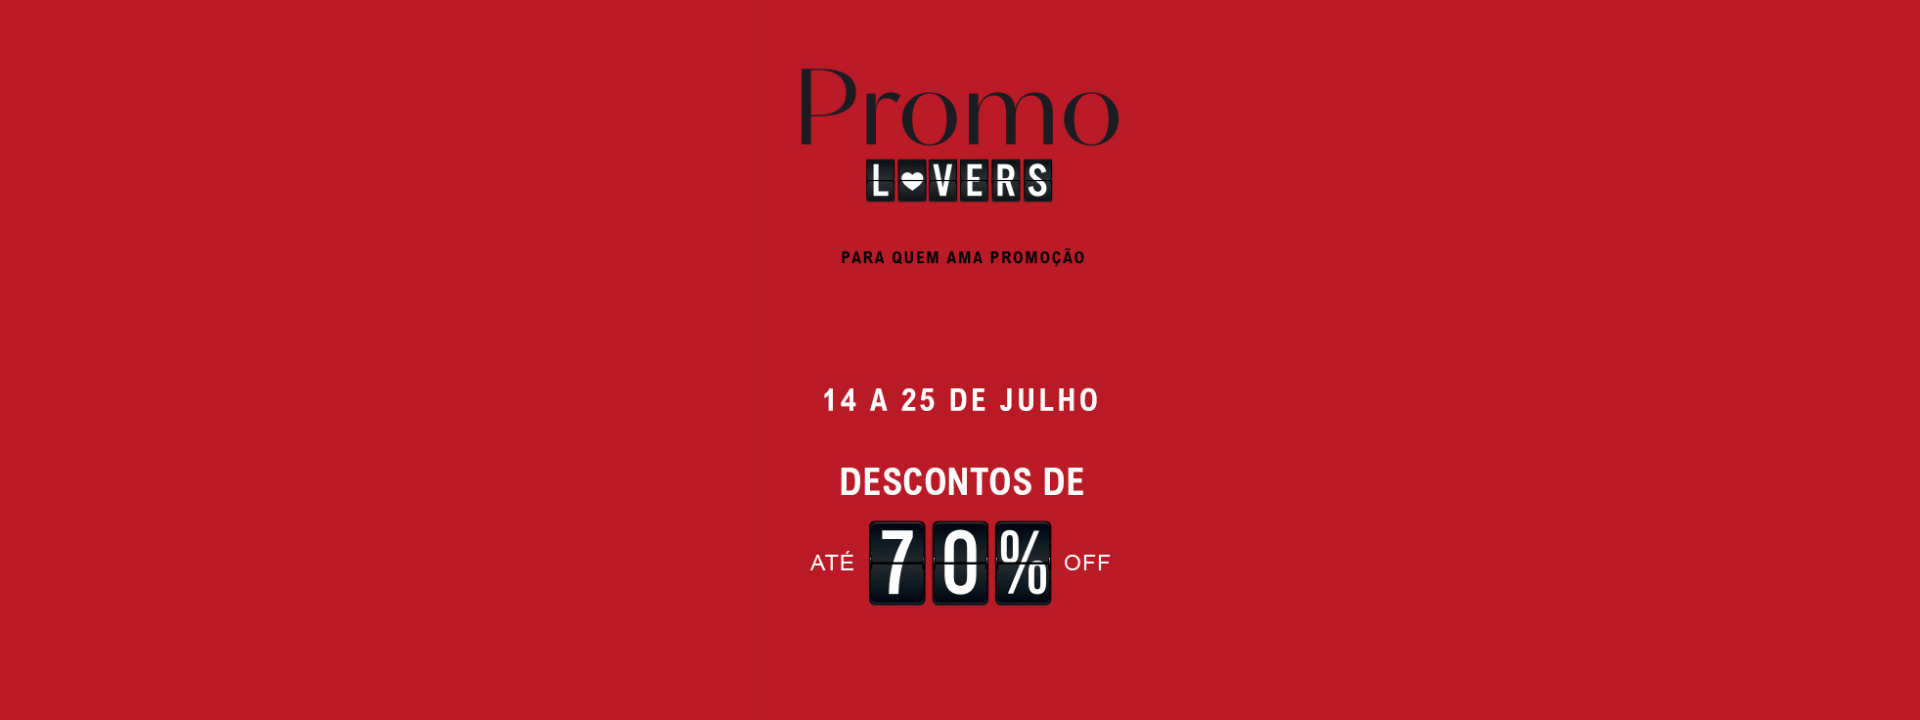 Promolovers